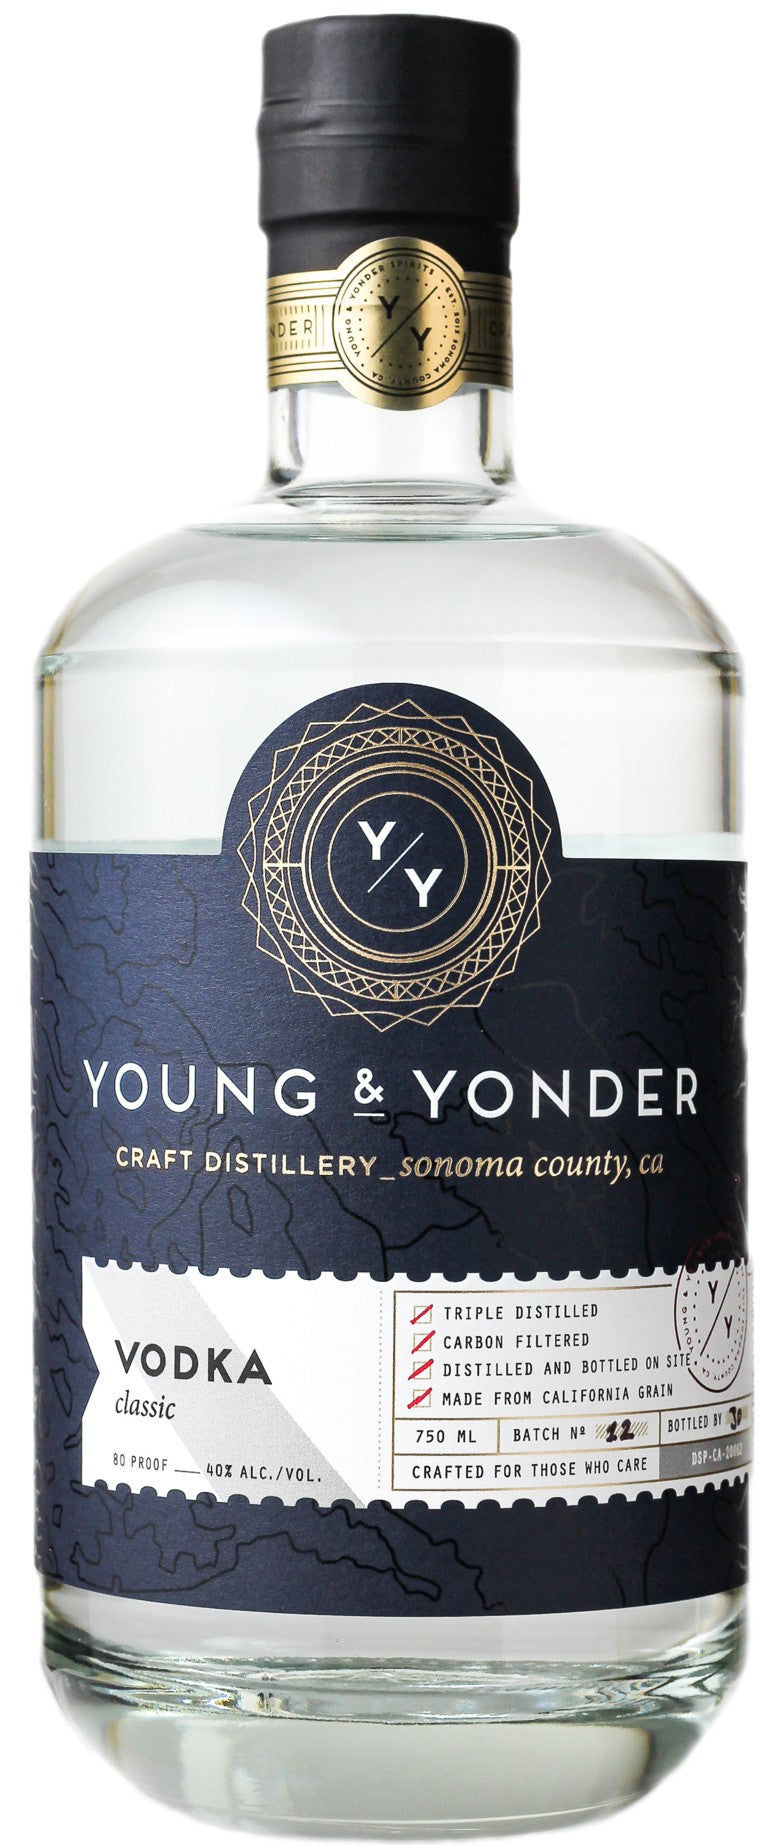 Young & Yonder Classic Vodka